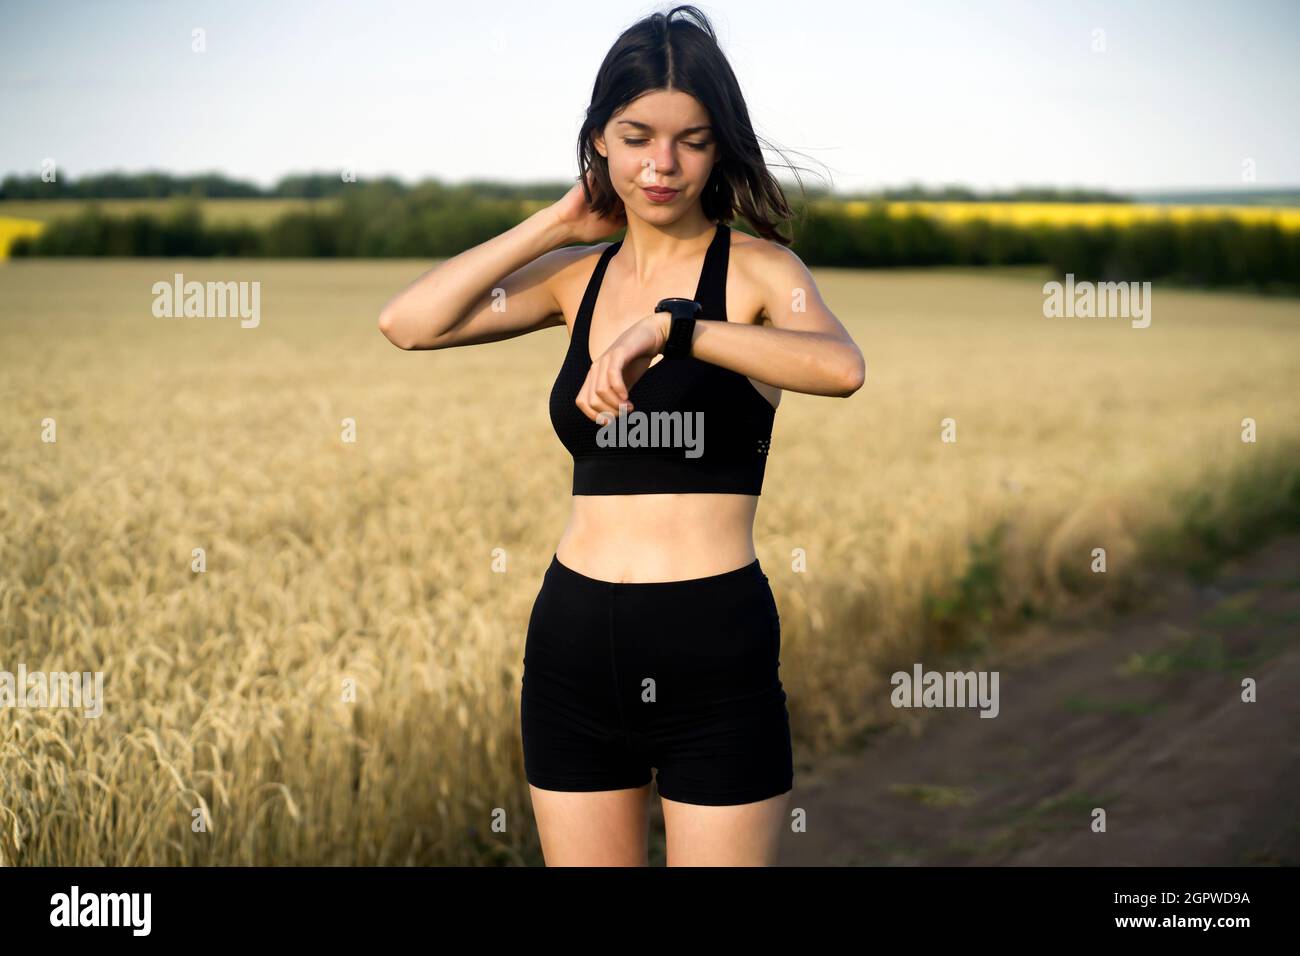 Girl looks at her watch, during running outdoor. Stock Photo